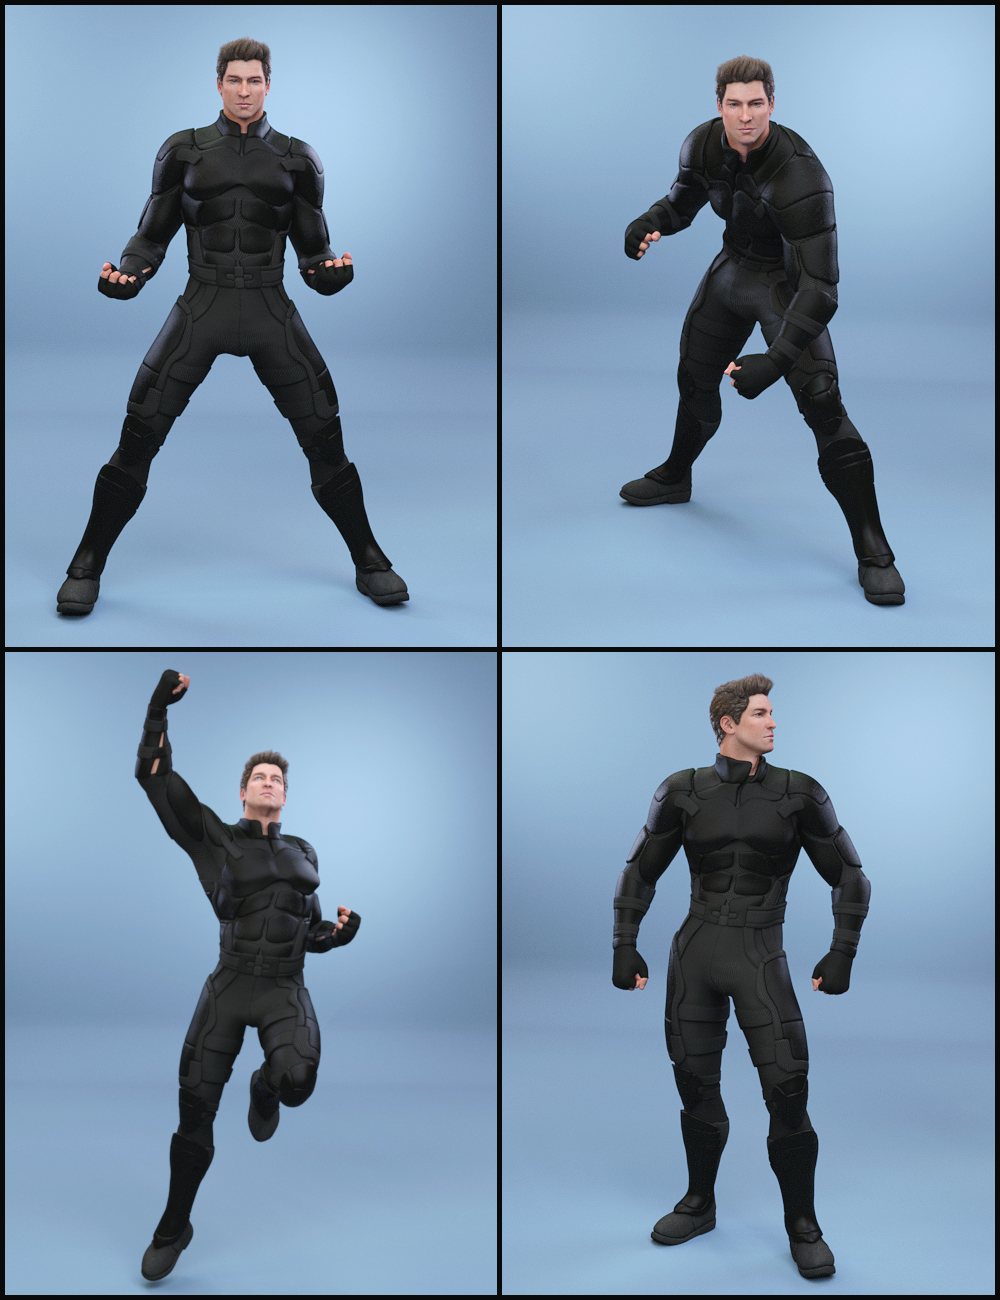 Super Power Poses by: Muscleman, 3D Models by Daz 3D